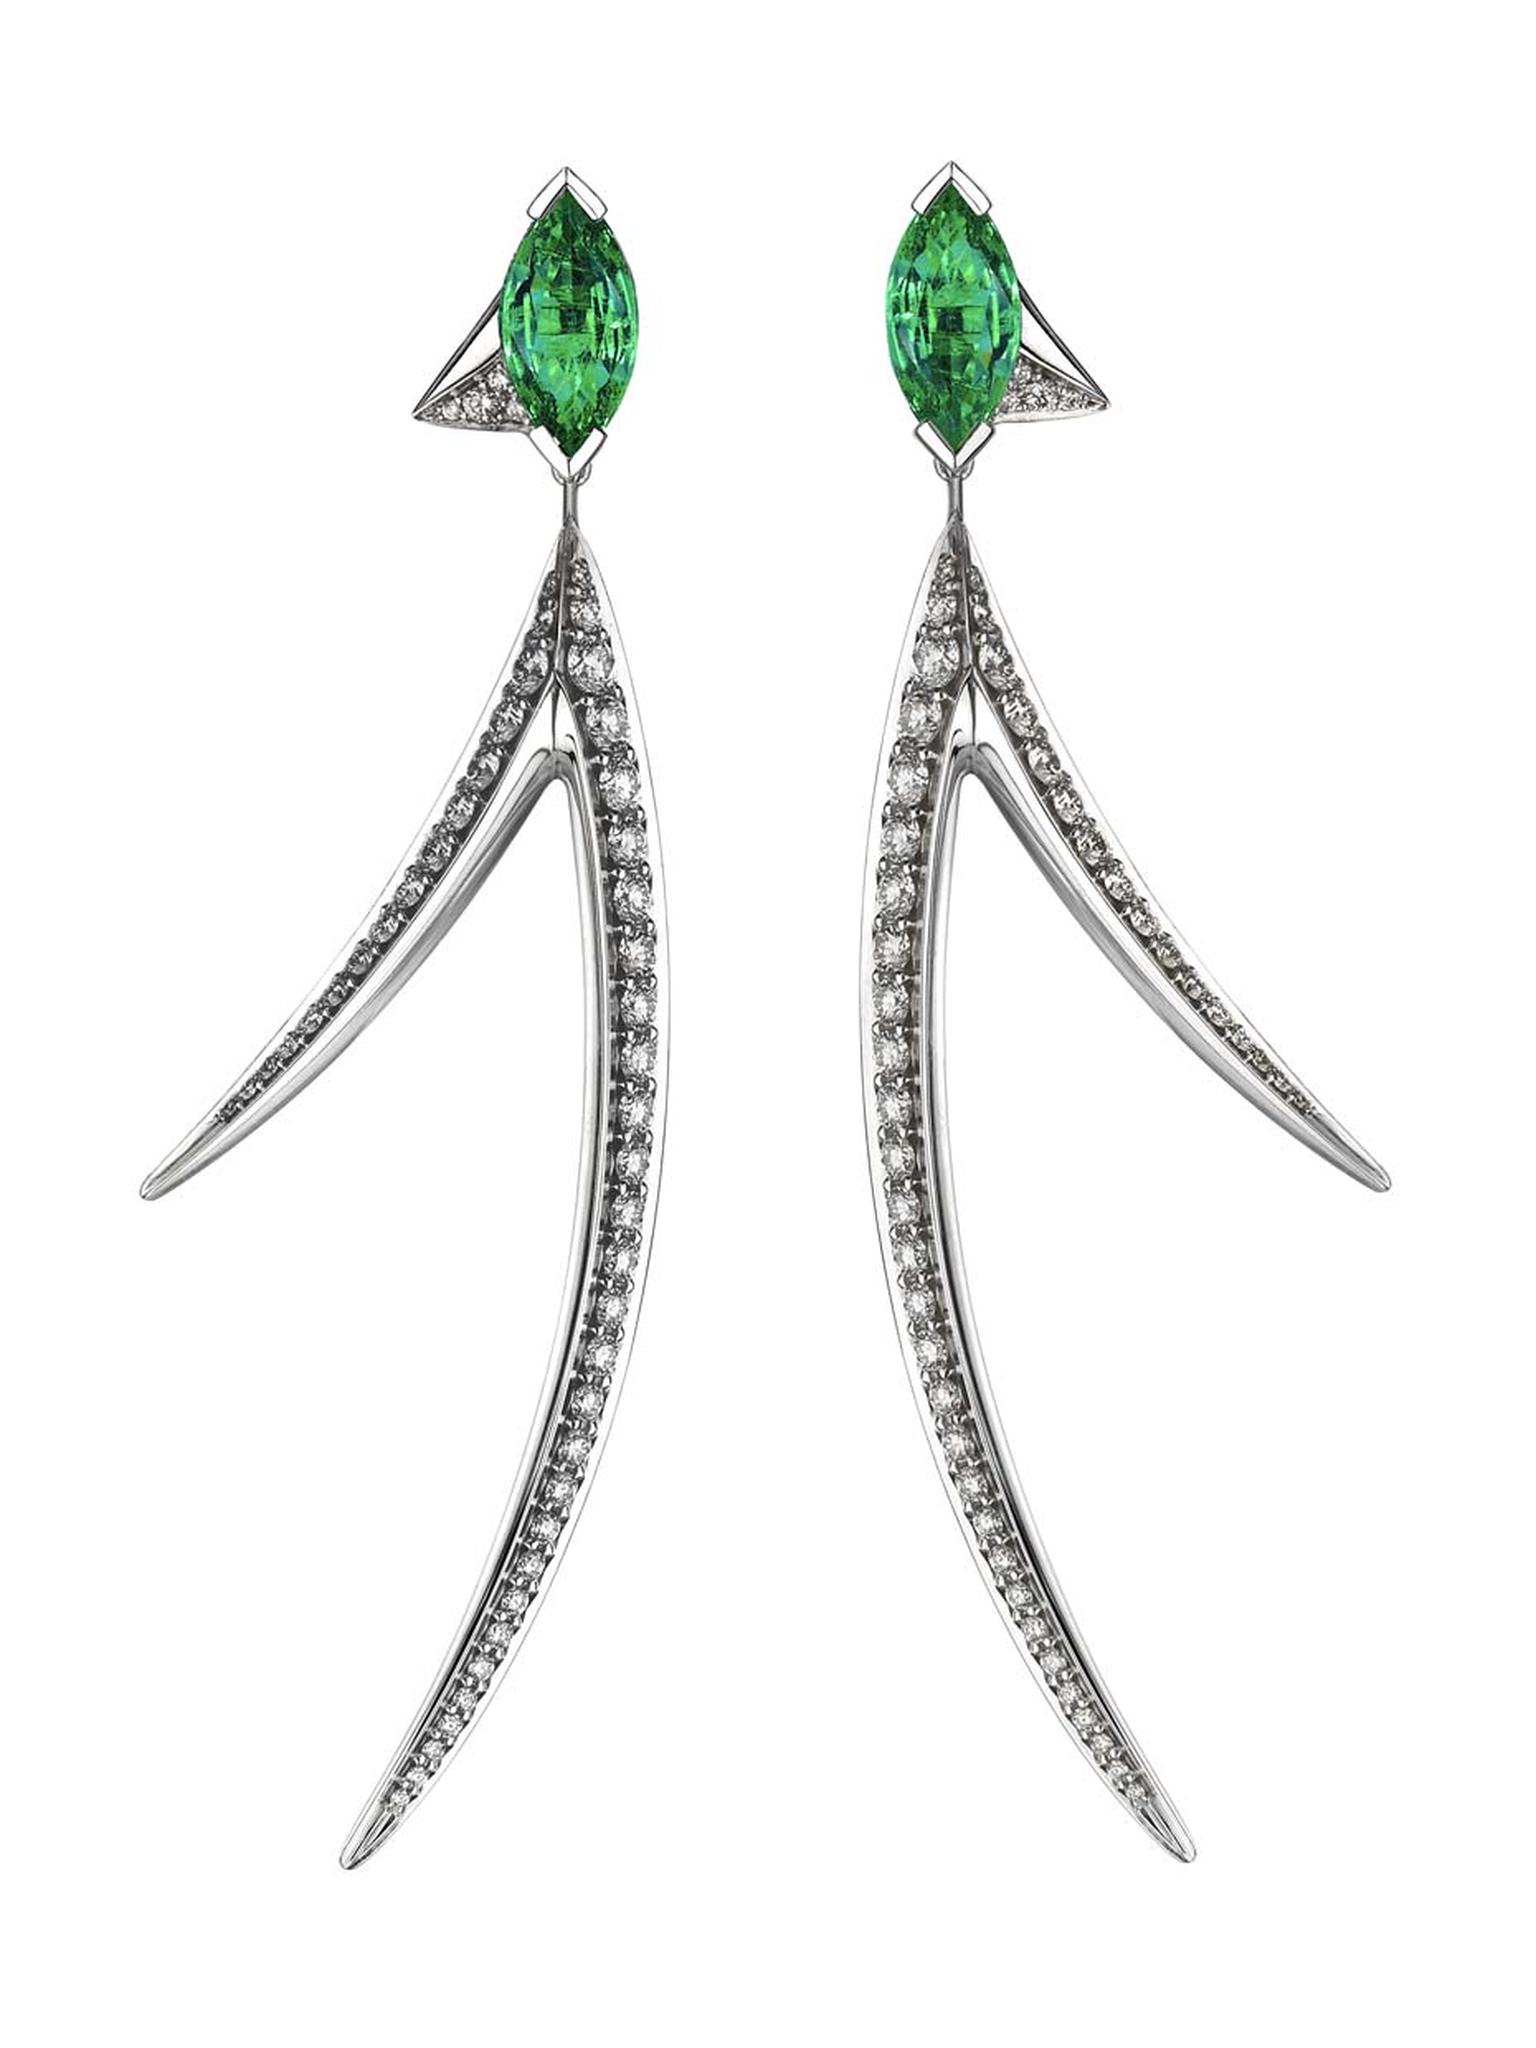 Shaun Leane Aerial collection white diamond and emerald stud earrings (£13,500.00).